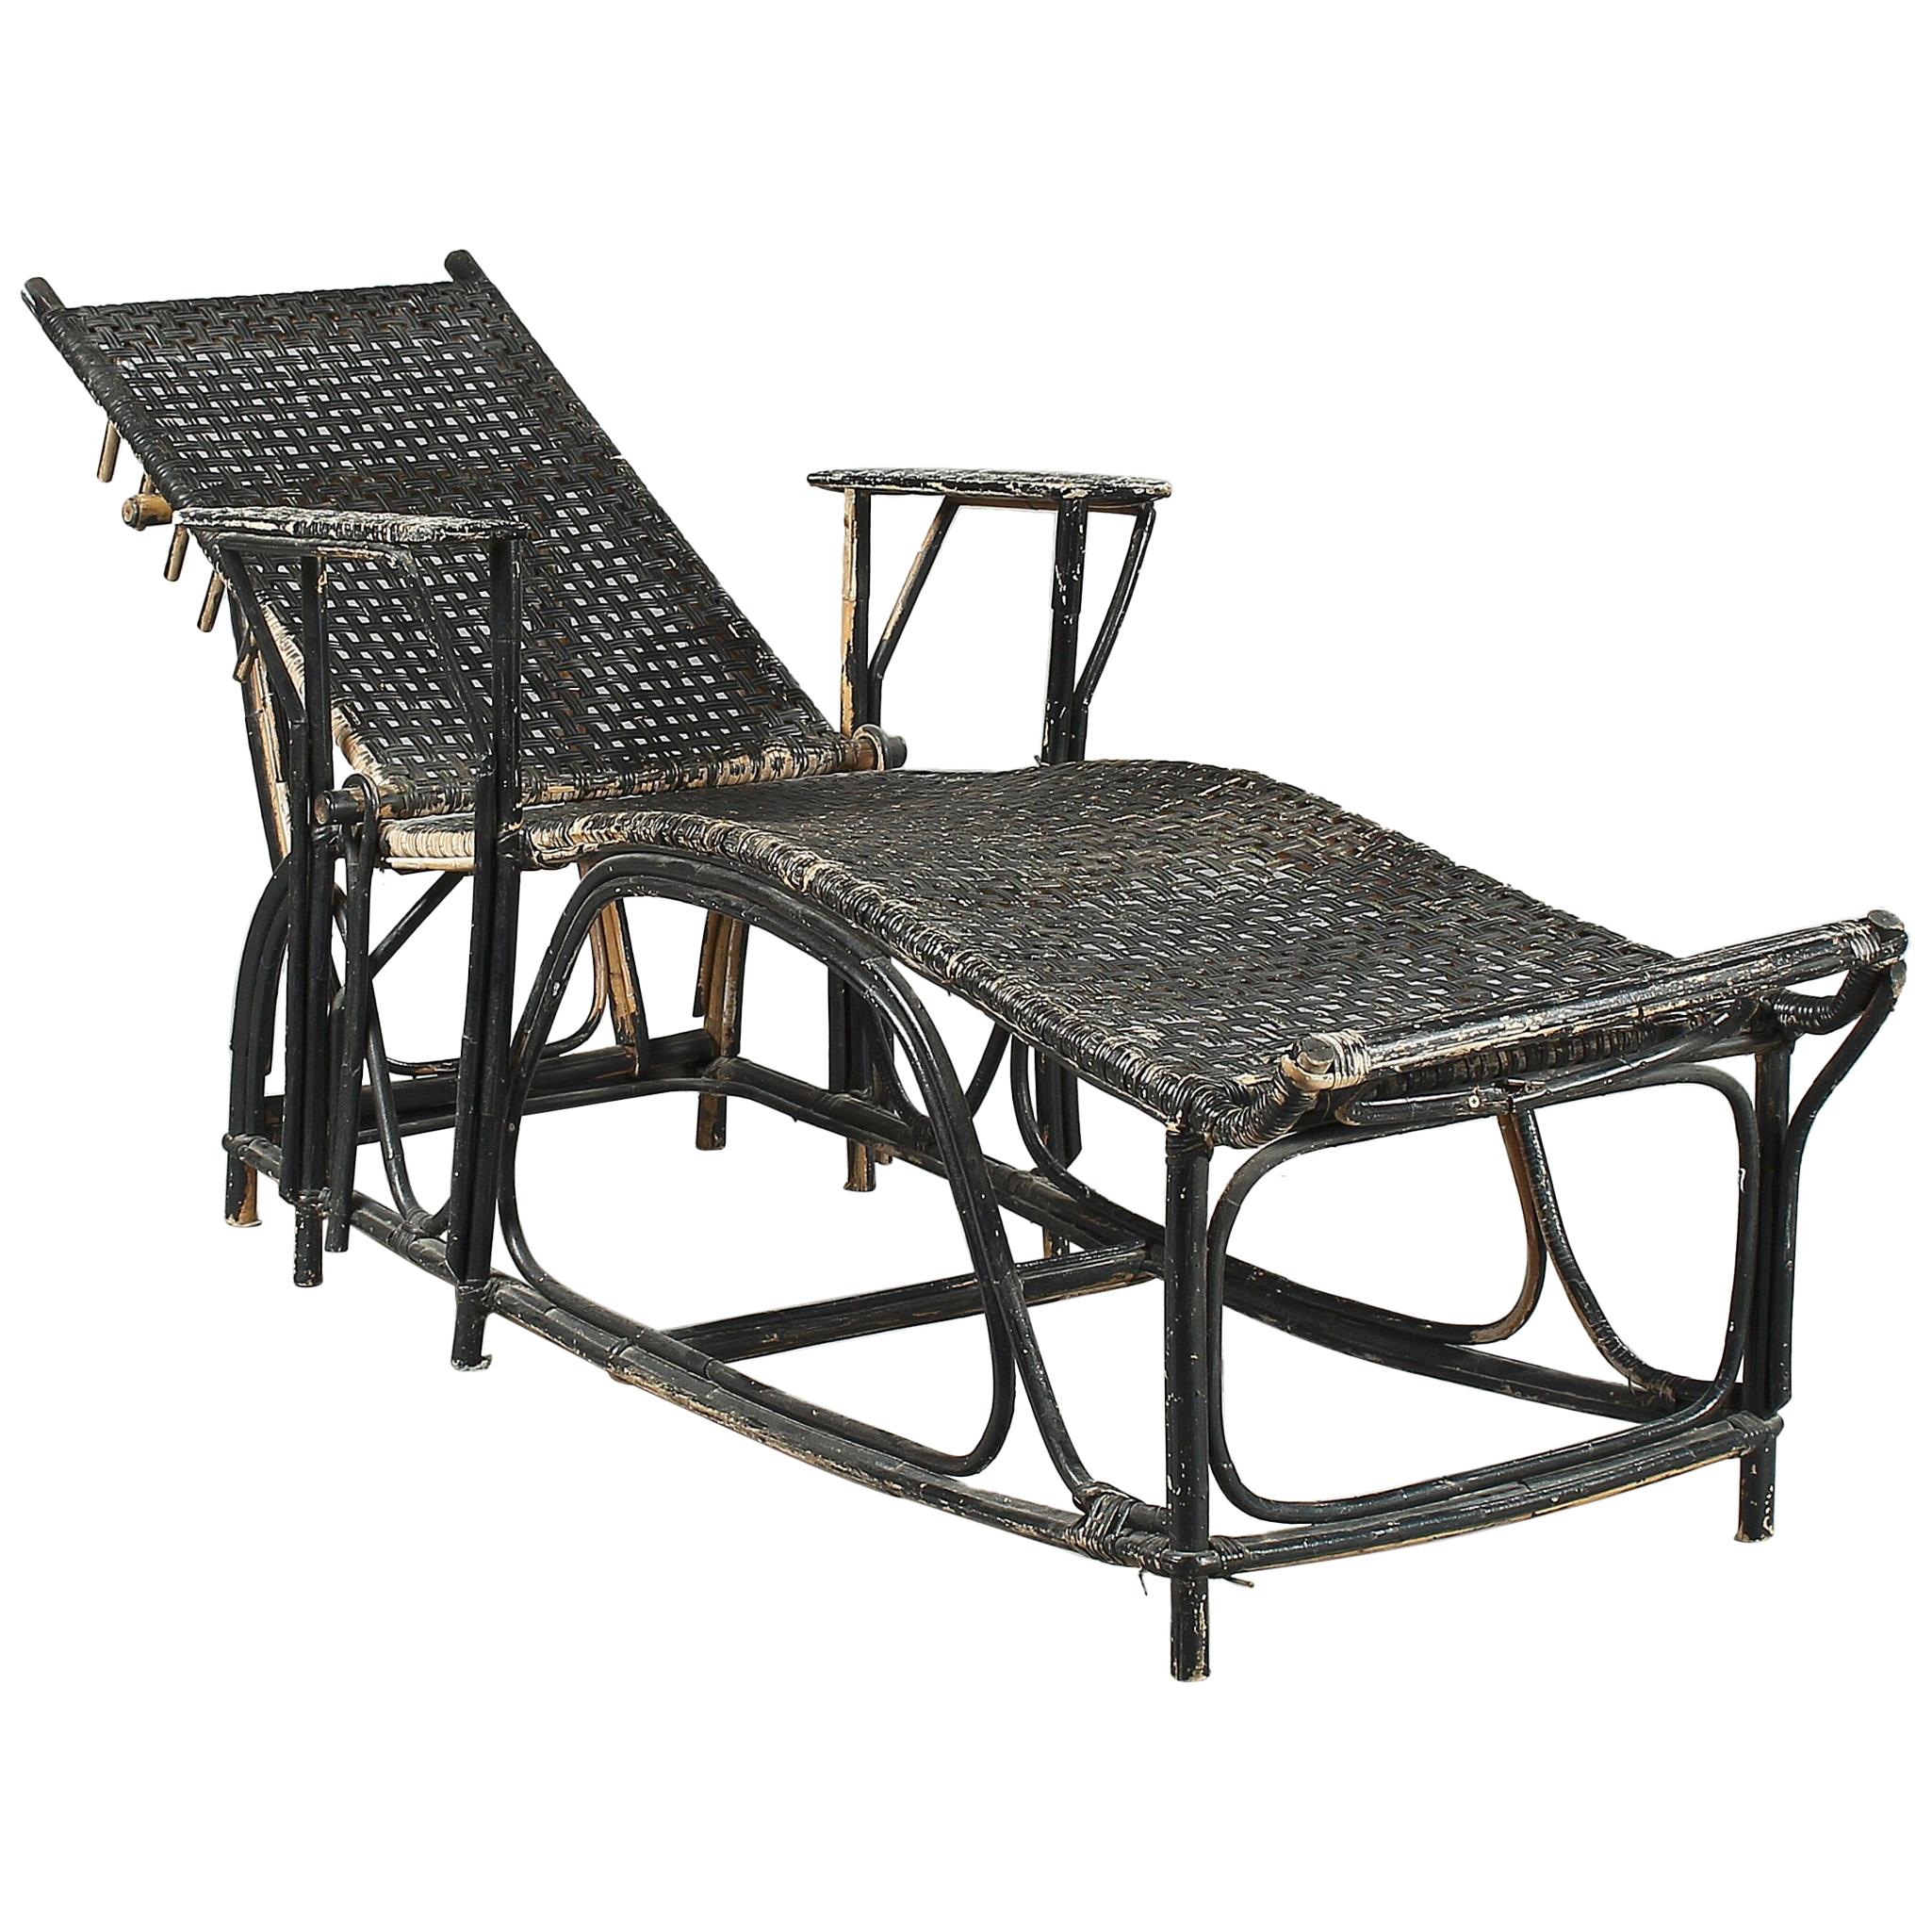 Sun Lounger with Black Colored Cane and Rattan For Sale